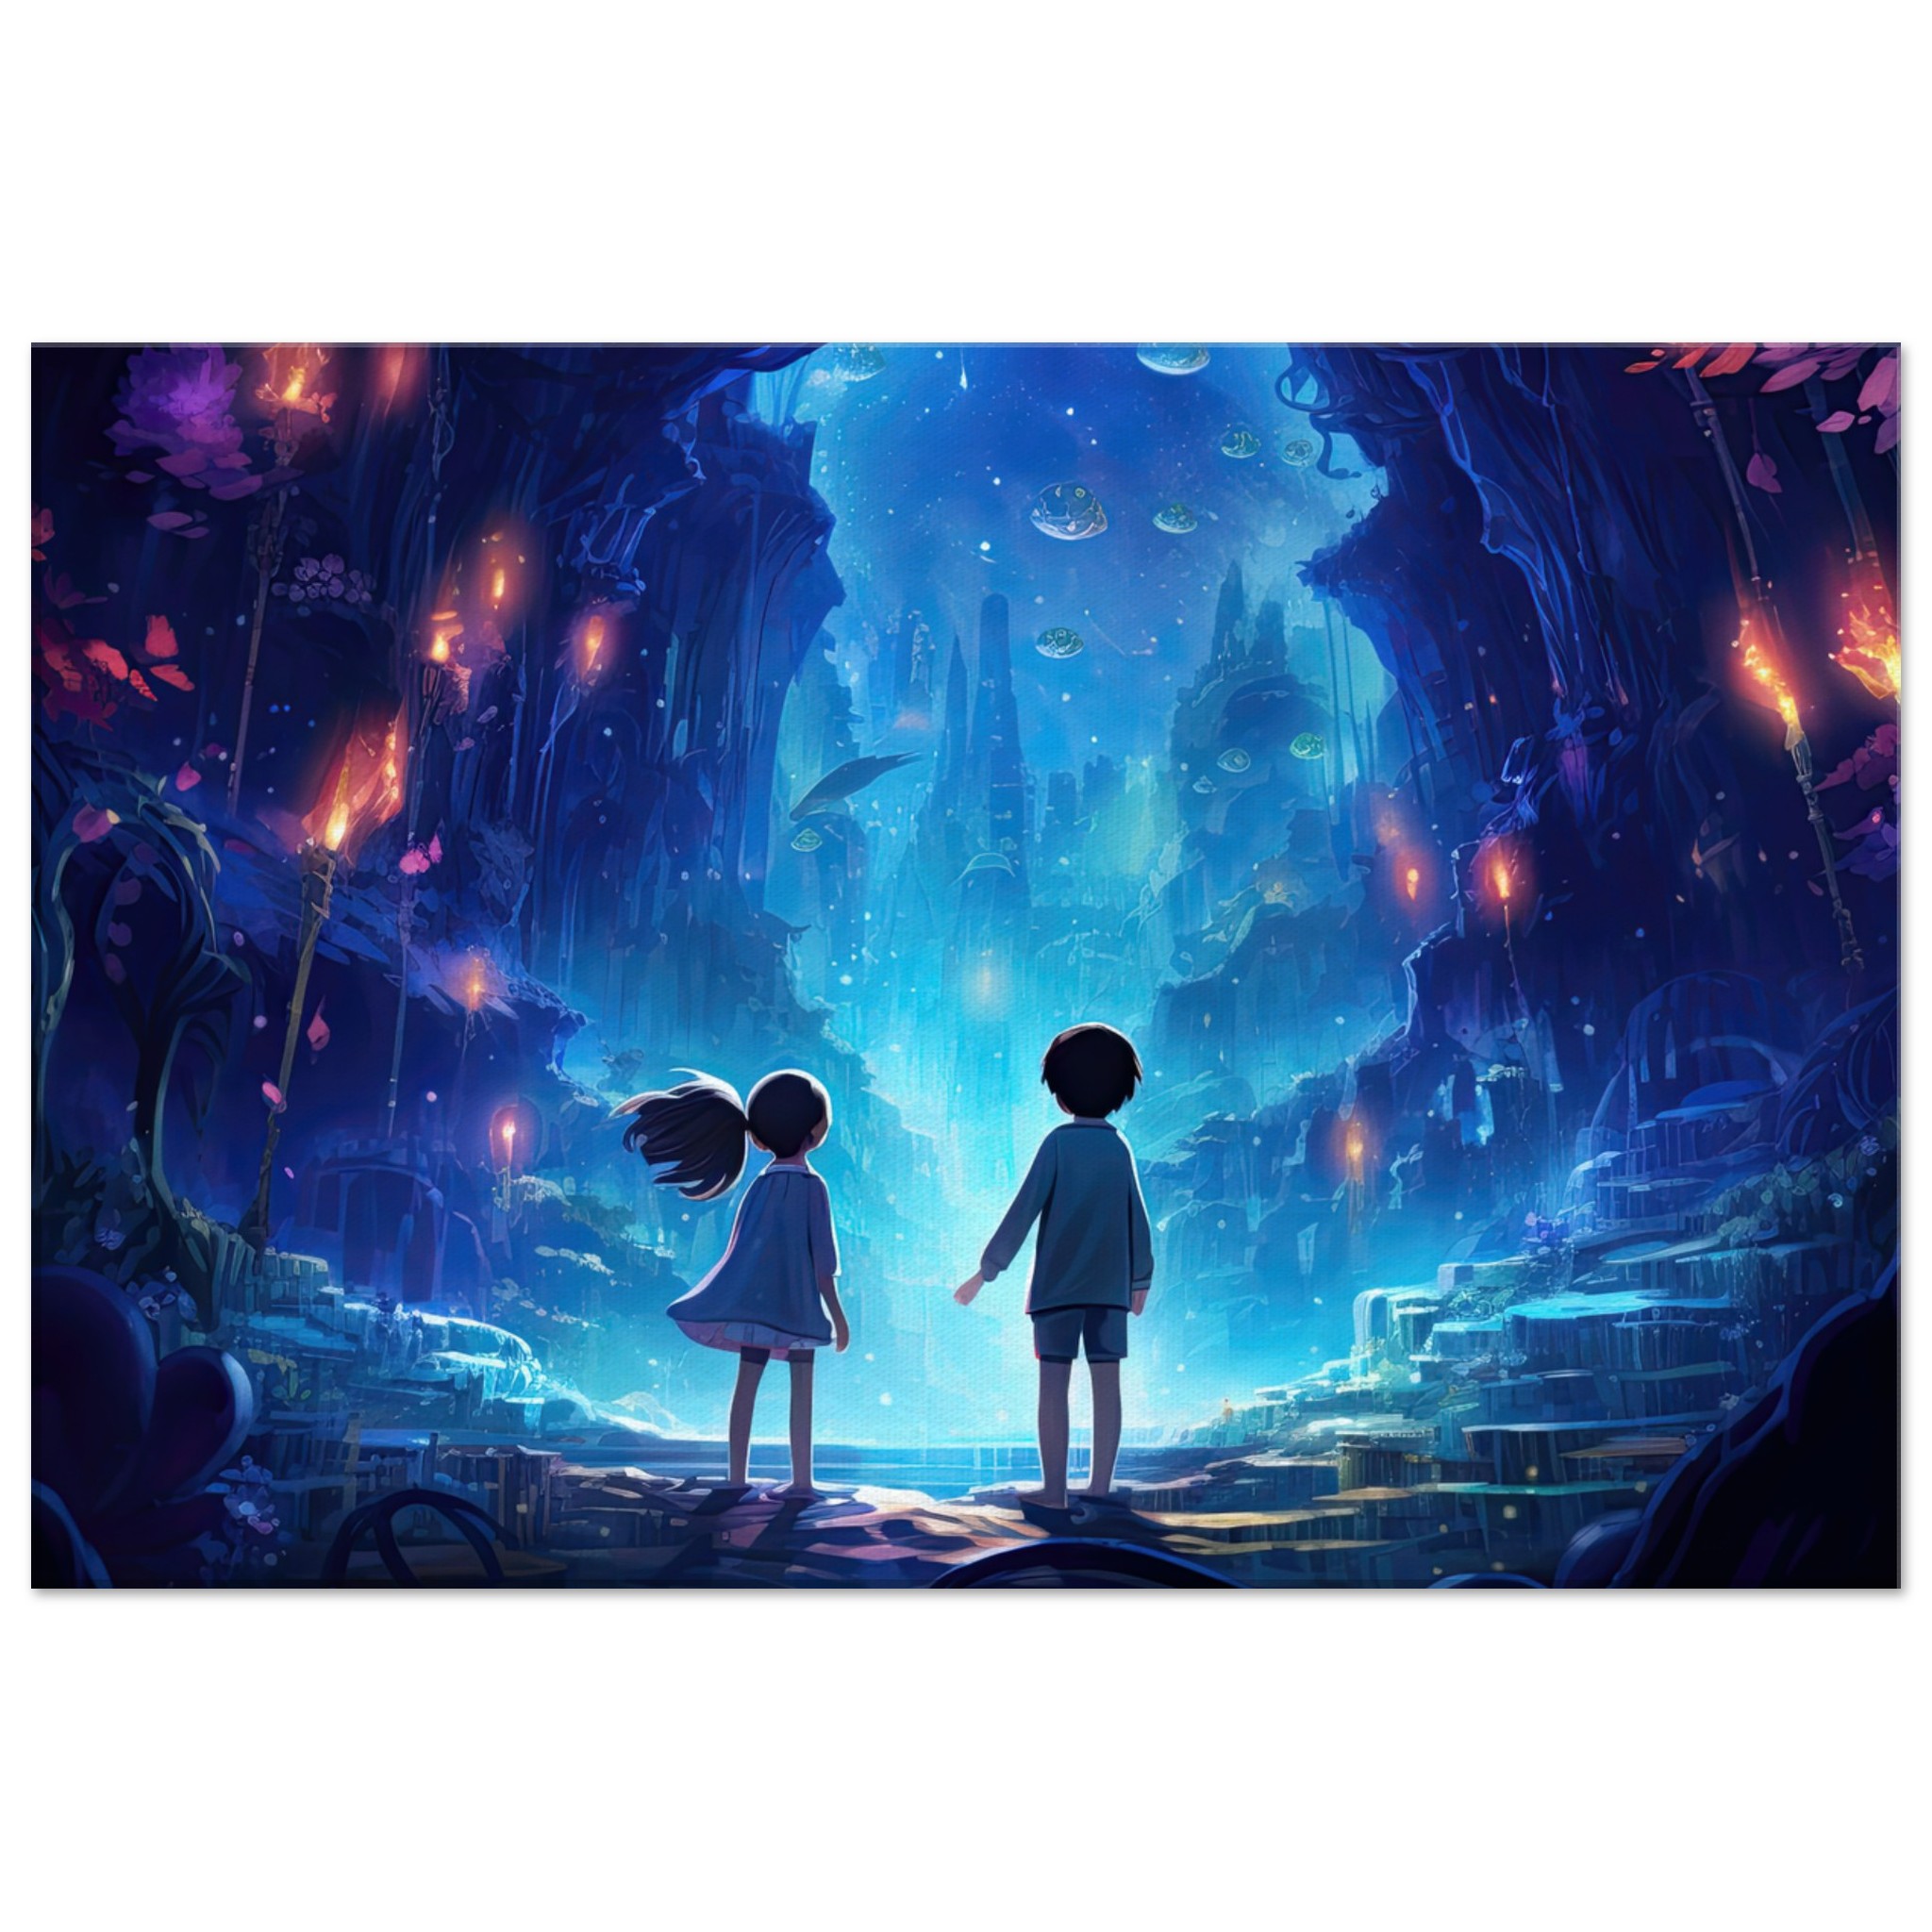 A World of Wonder – Anime Style Canvas Print – 50×75 cm / 20×30″, Thick